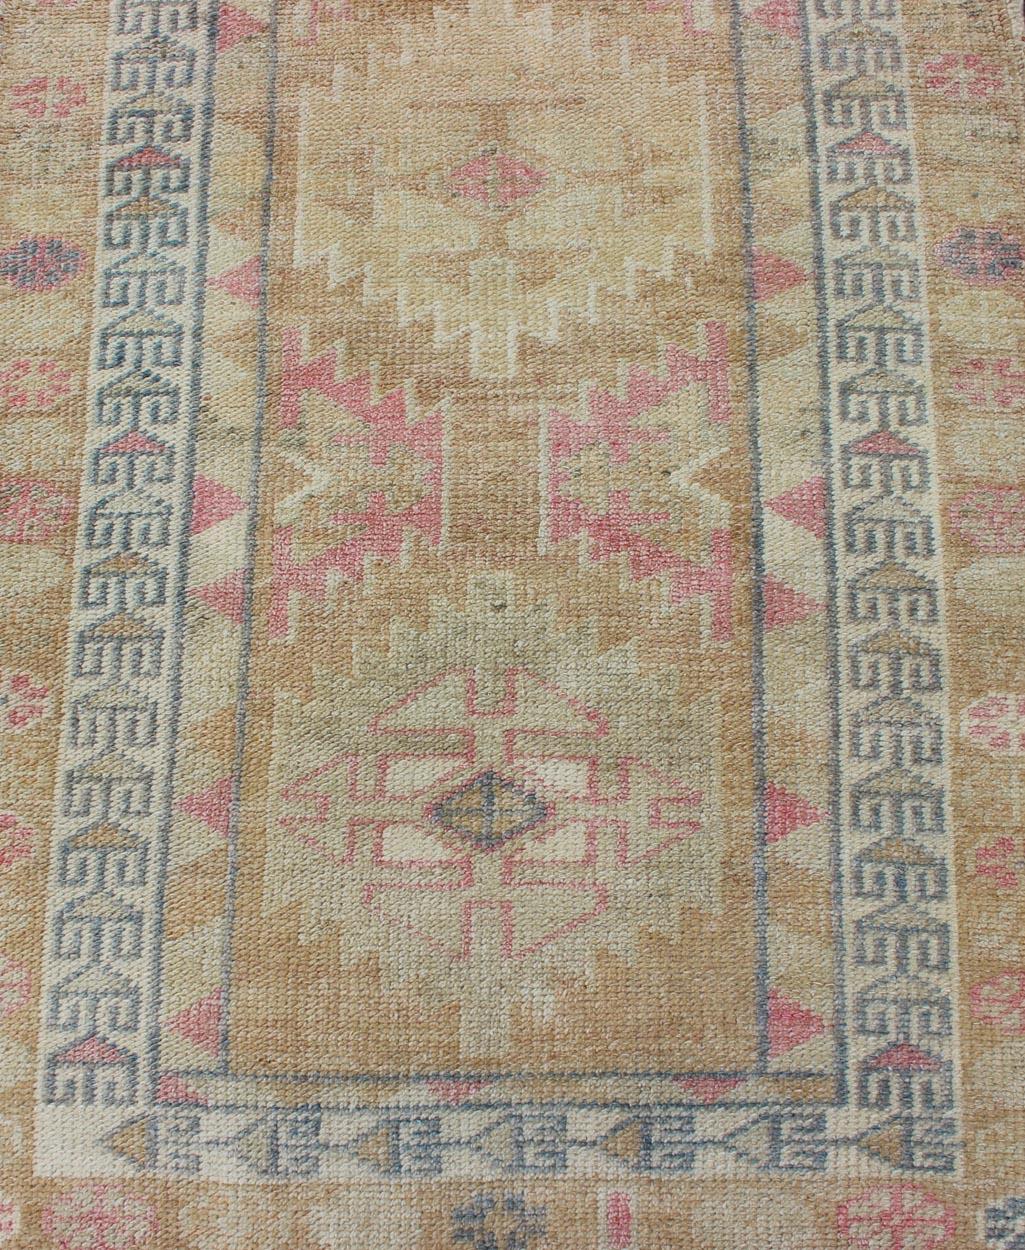 Tribal Design Vintage Turkish Runner in Light Pink, Sapphire Blue & Muted Tones For Sale 1